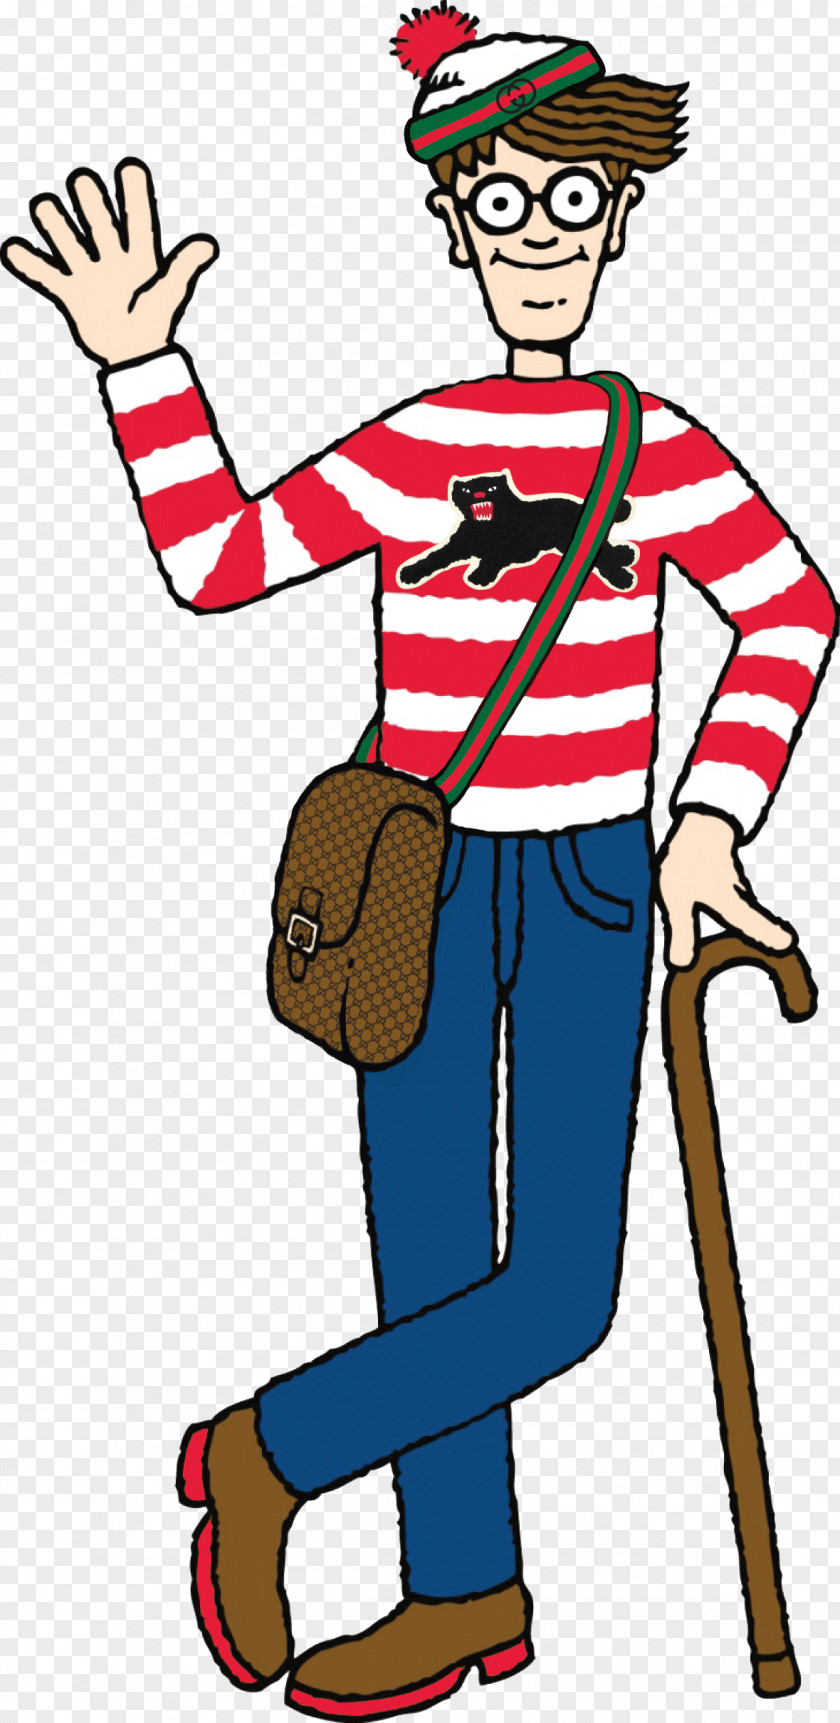 Gucci Gang Where's Wally? Children's Literature Walker Books Odlaw PNG